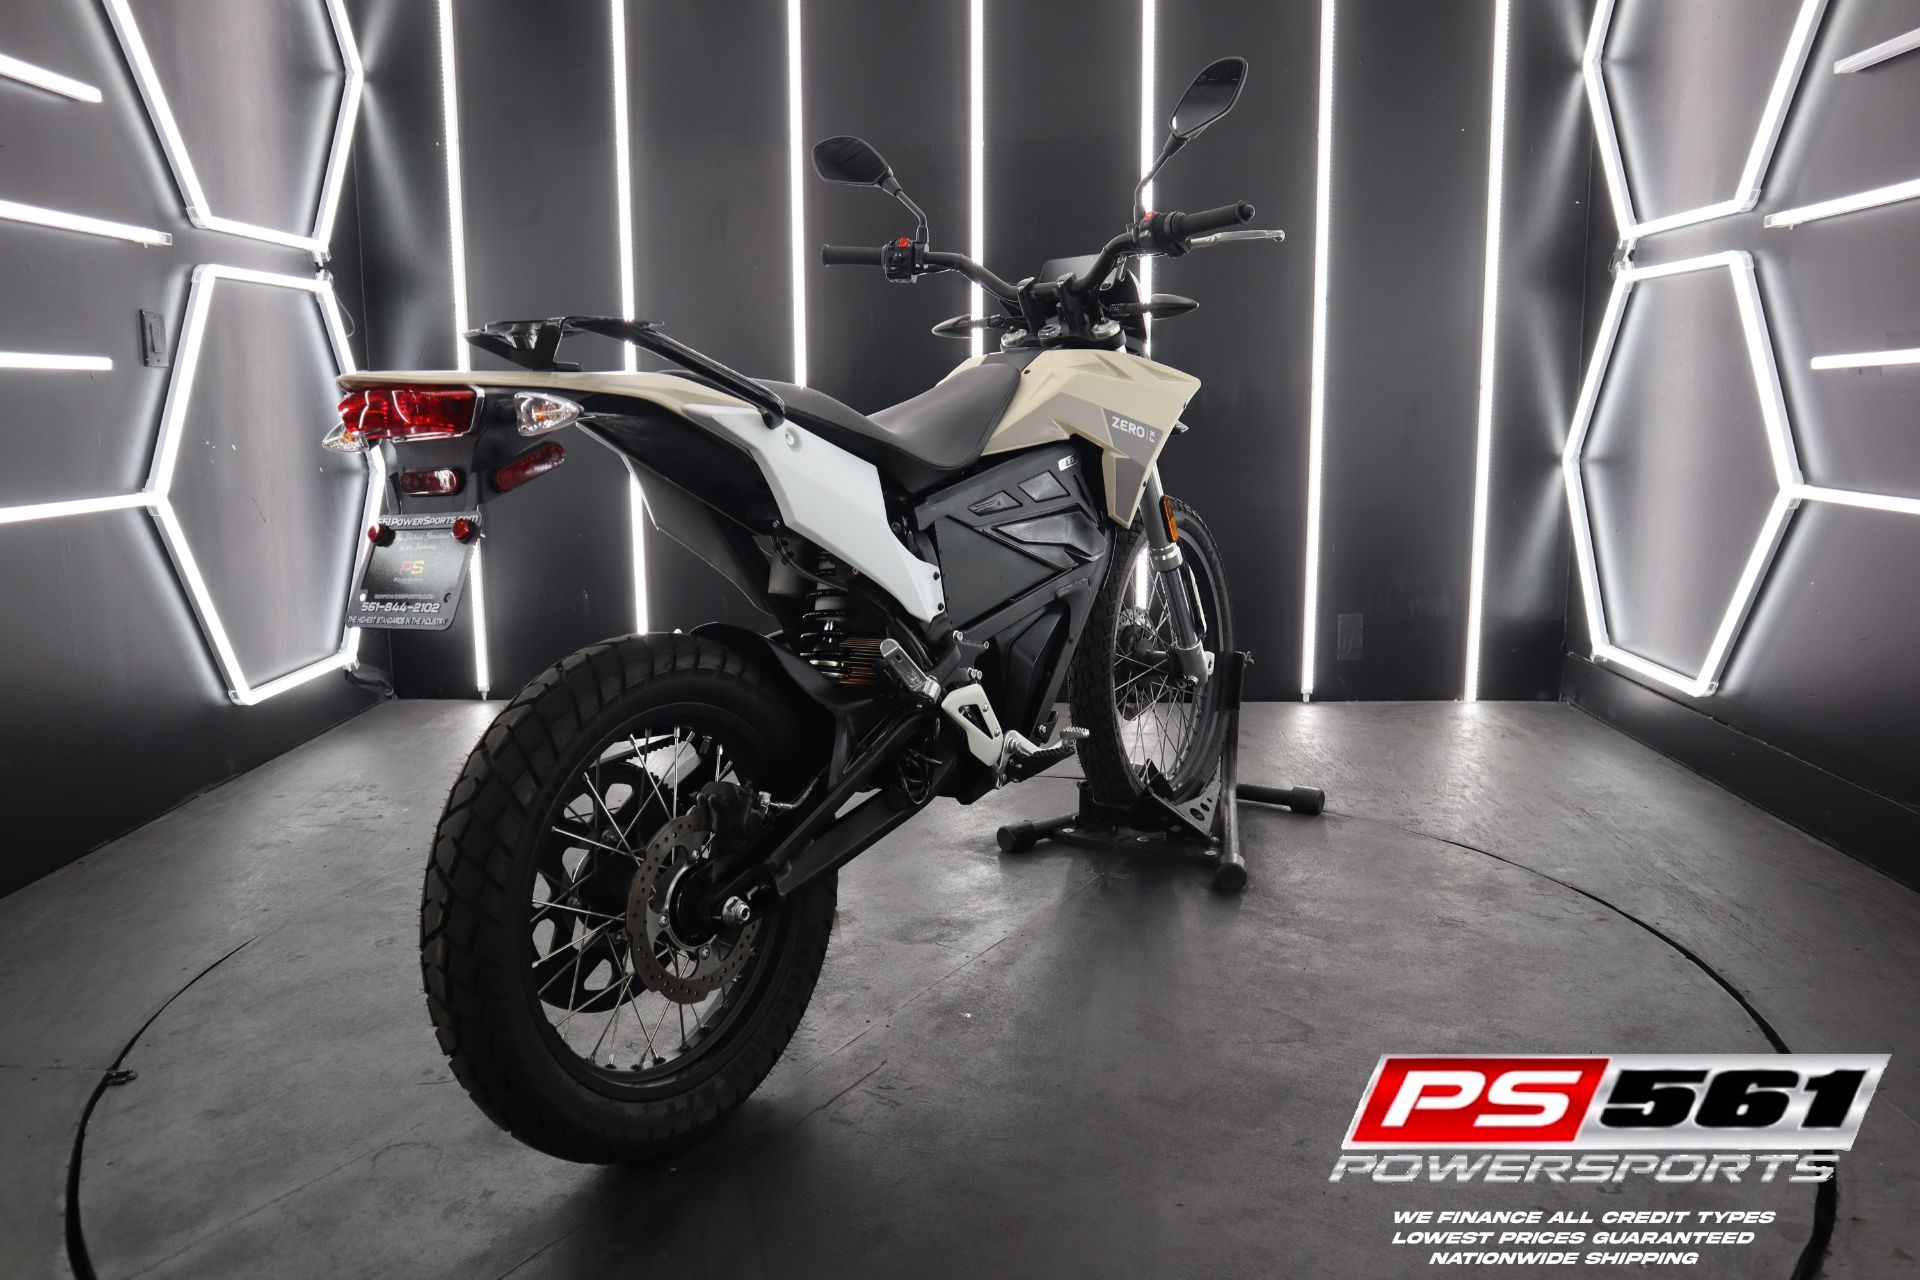 2022 Zero Motorcycles FX ZF7.2 Integrated in Lake Park, Florida - Photo 20